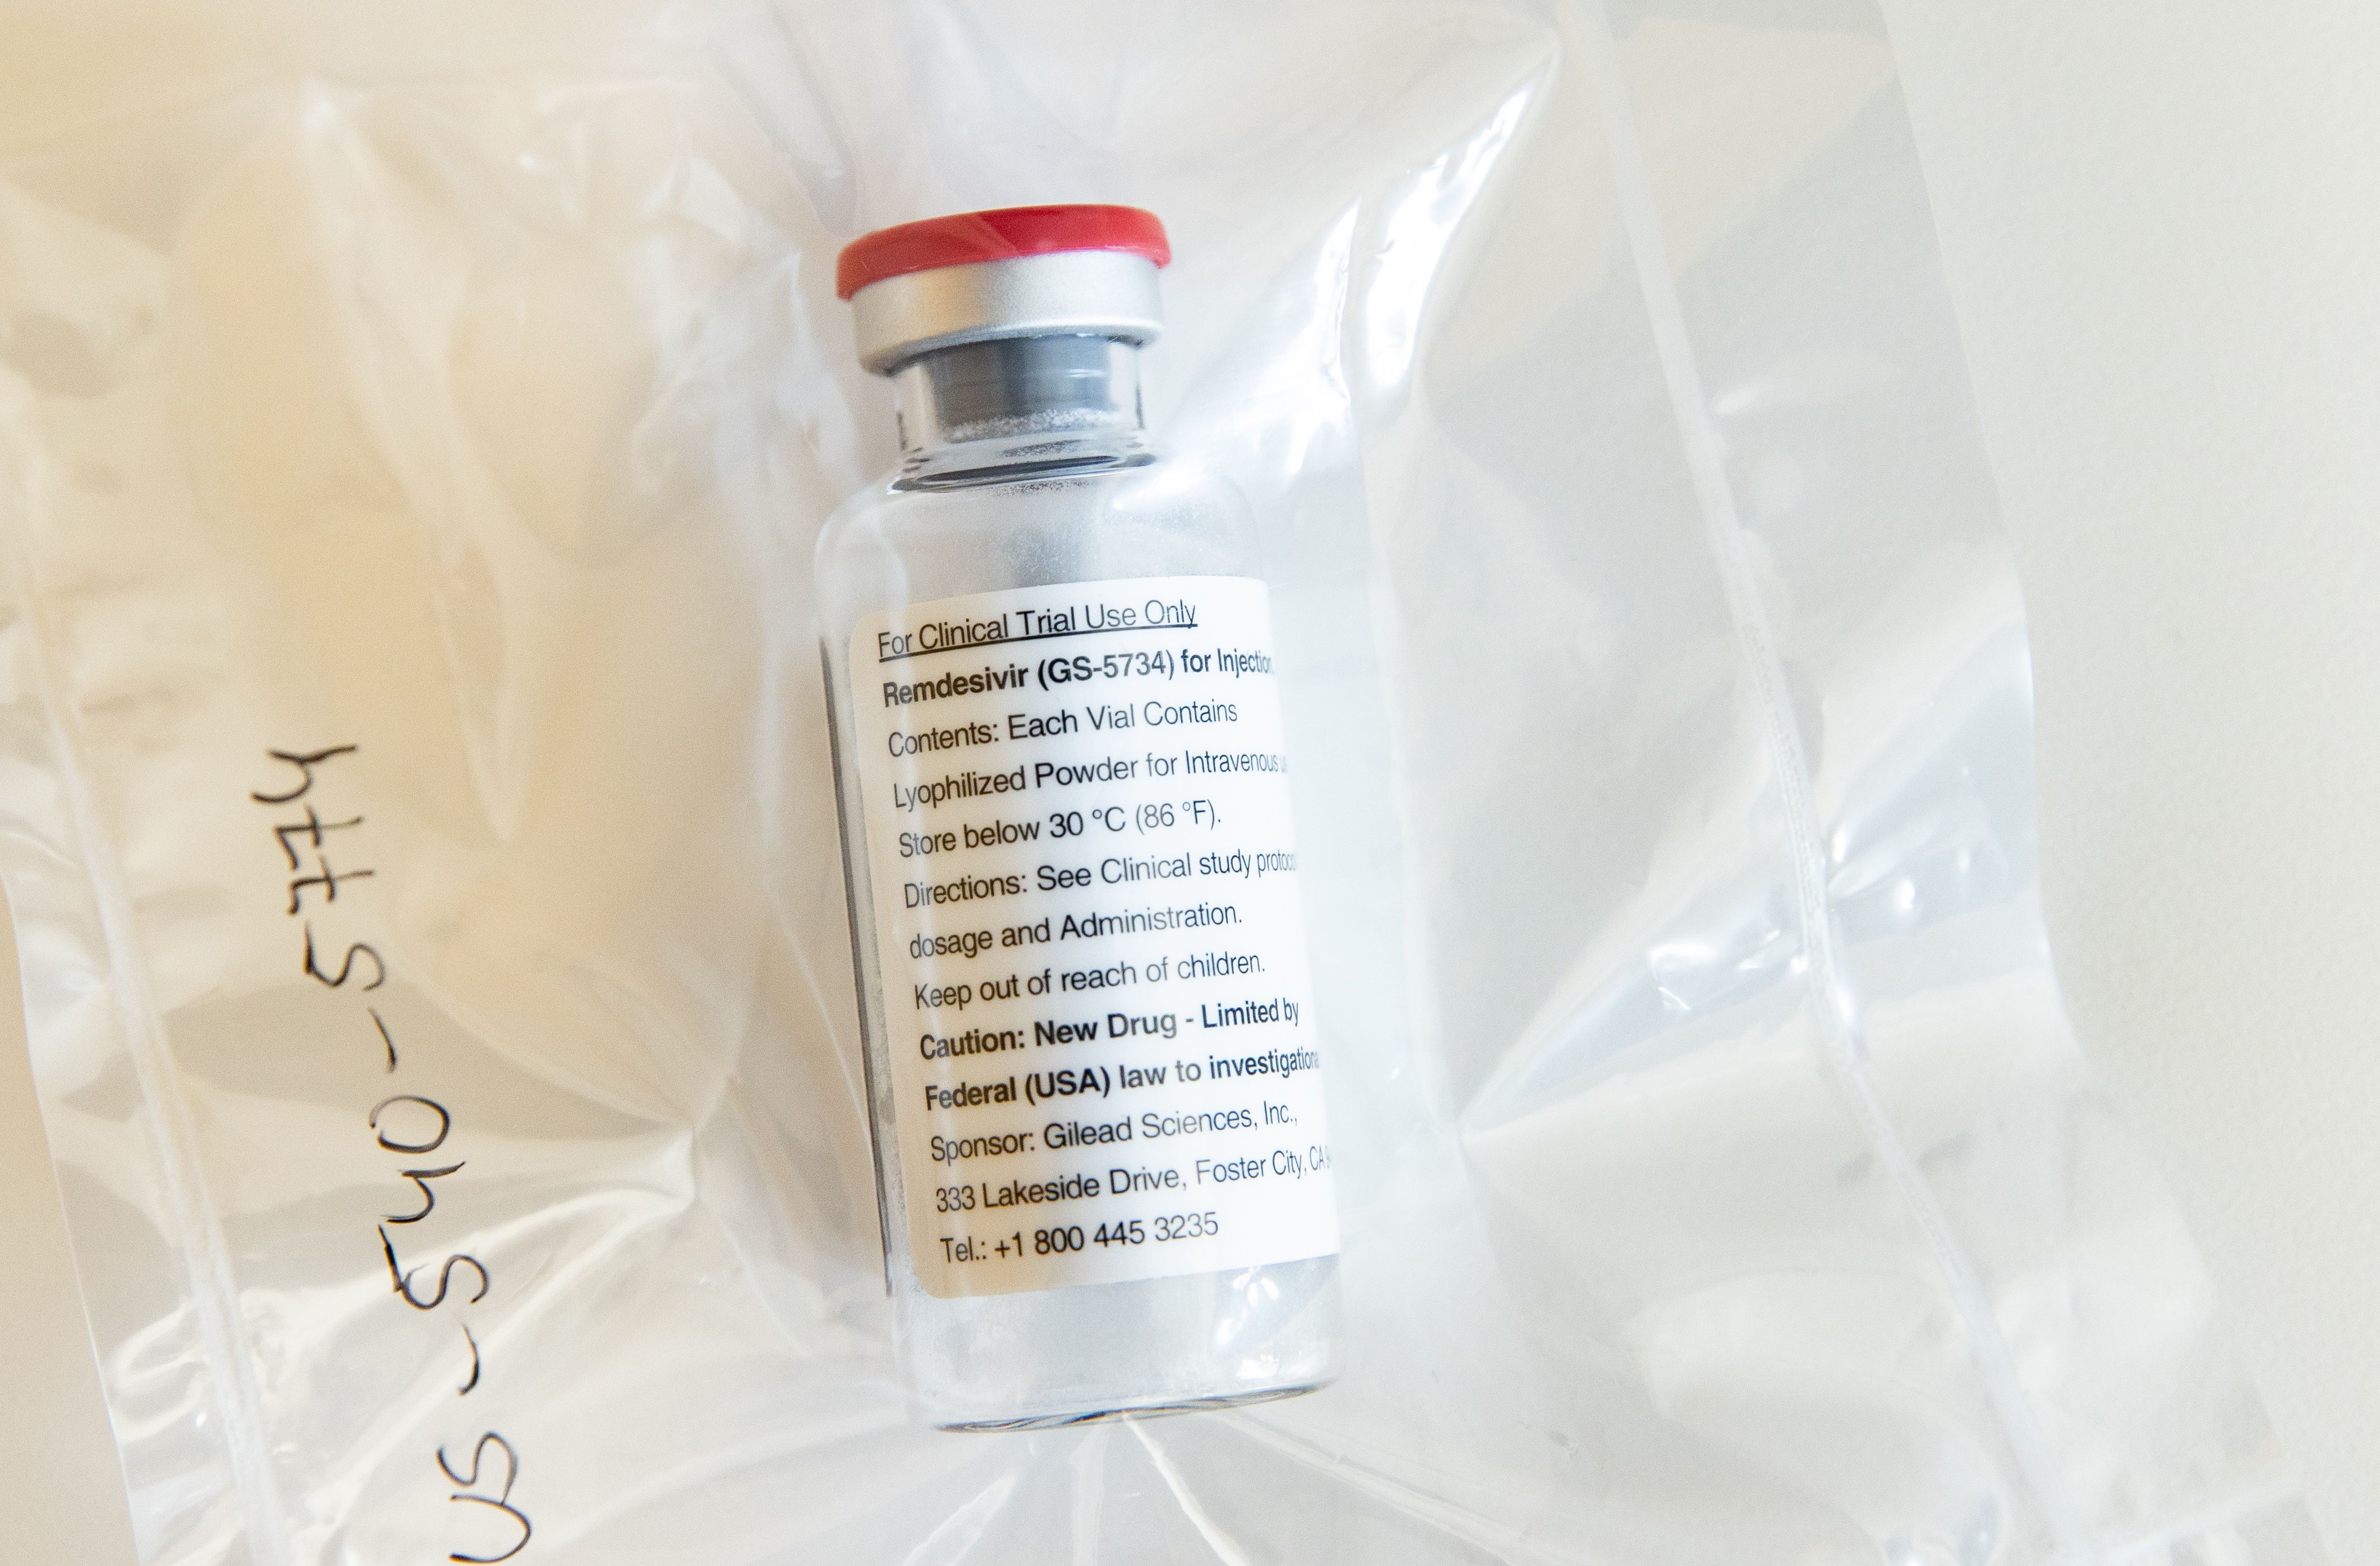 One vial of the drug Remdesivir lies during a press conference about the start of a study with the Ebola drug Remdesivir in particularly severely ill patients at the University Hospital Eppendorf (UKE) in Hamburg, northern Germany on April 8, 2020, amidst the new coronavirus COVID-19 pandemic.